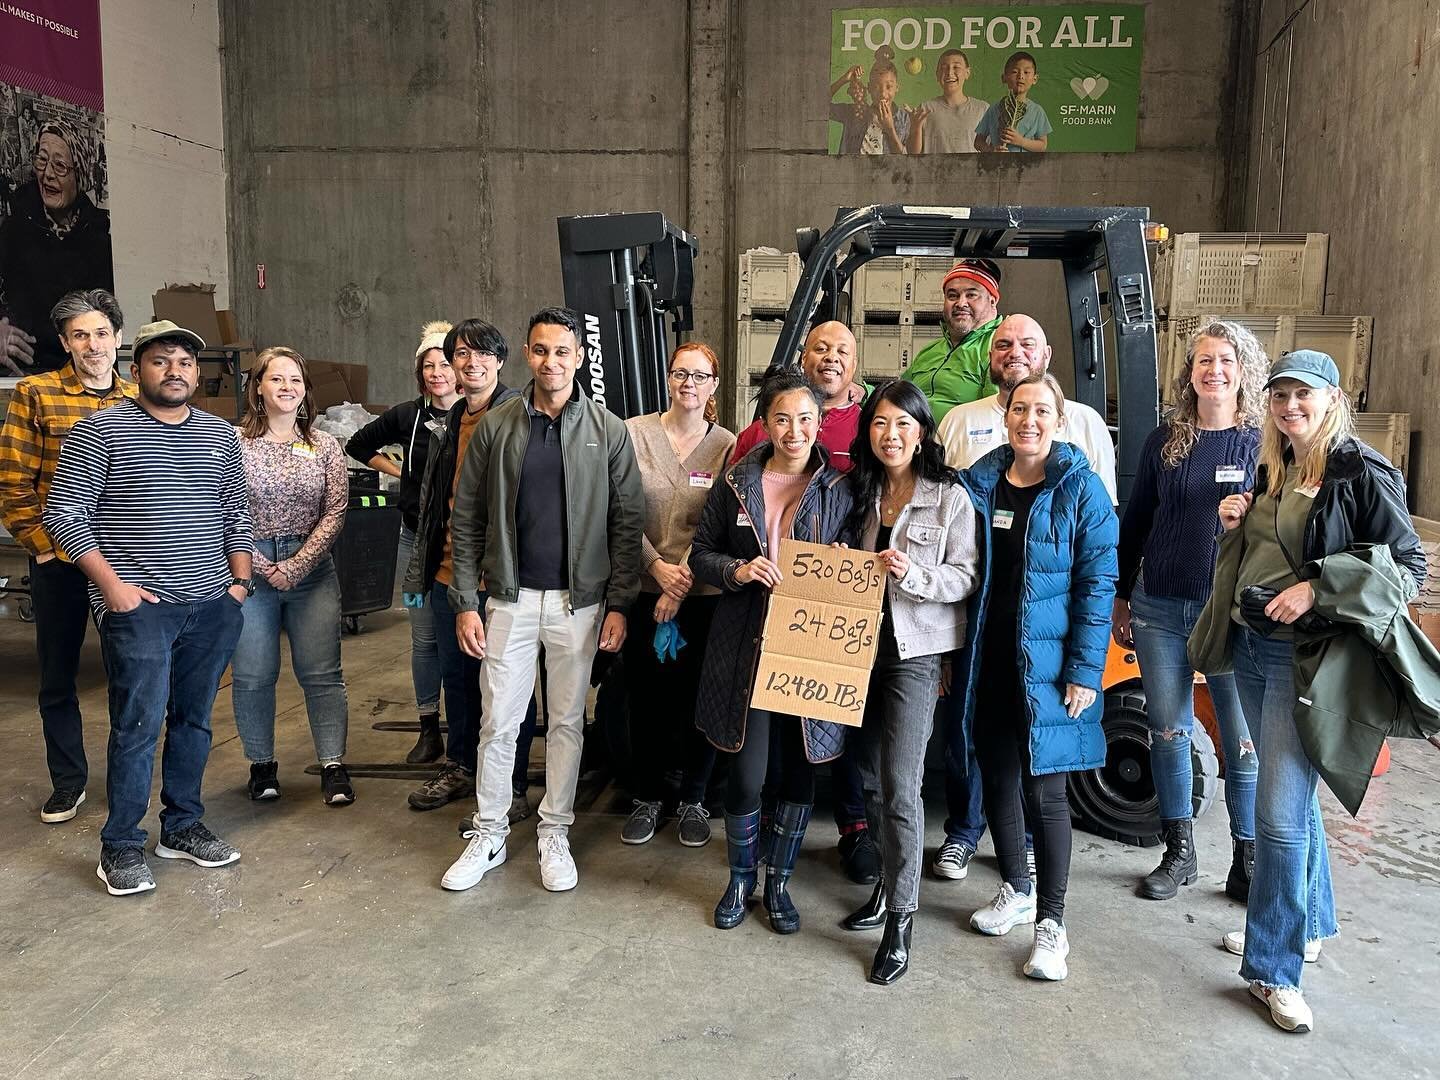 Thanks everyone who came out last weekend to help out at the food bank!

#dating #single #datinginSF #bayareadating #bayareasingles #stopswipingstartdating